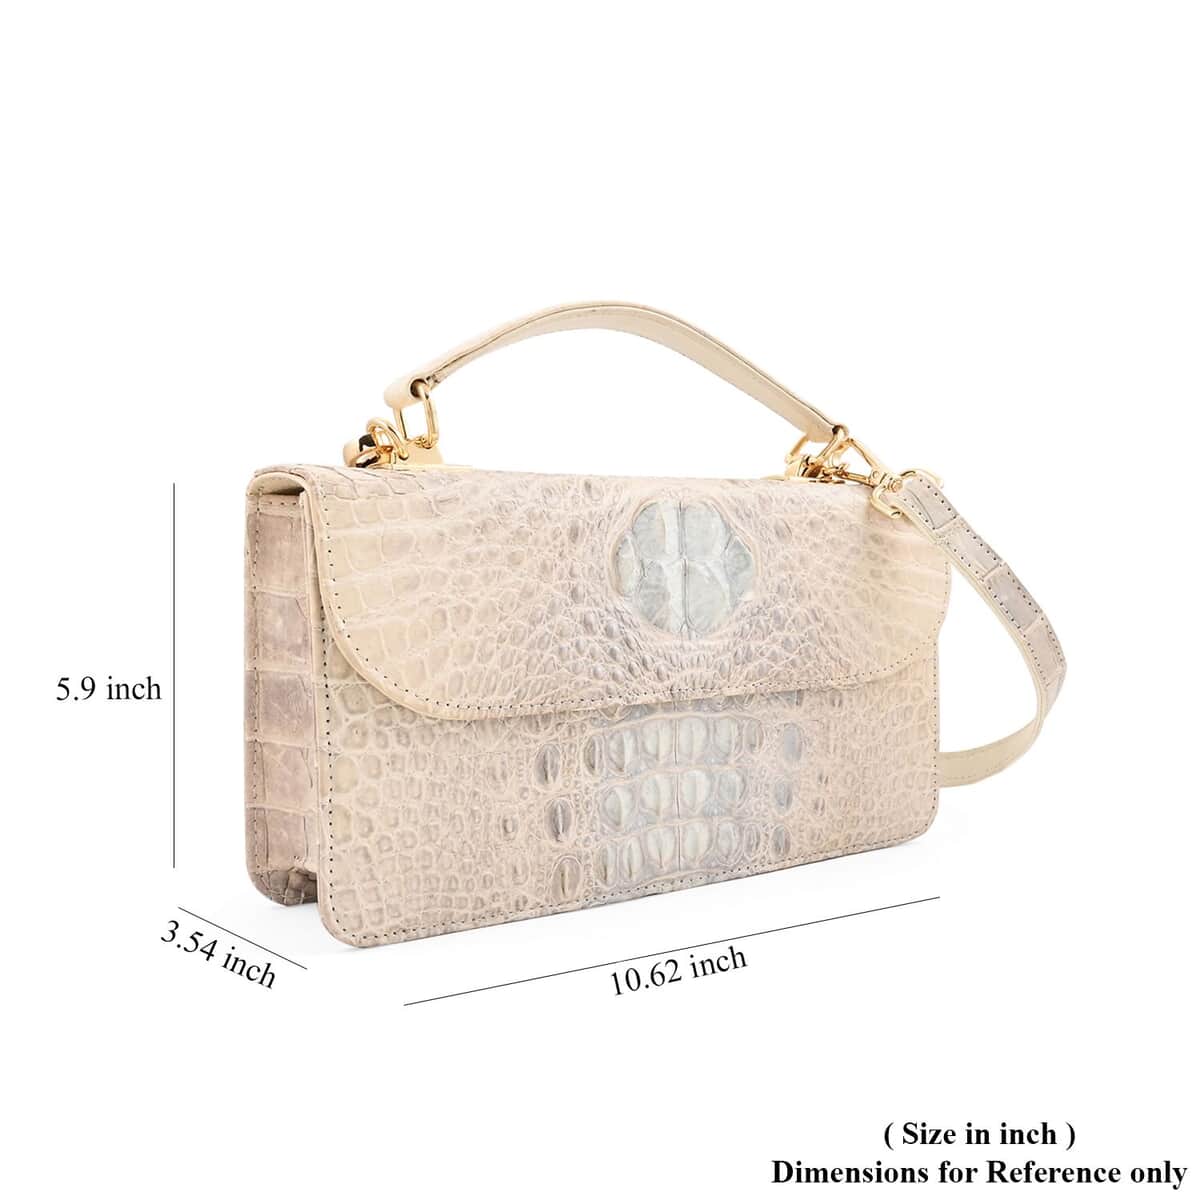 Grand Pelle Natural Genuine Crocodile Leather Crossbody Bag (10.62"x5.9"x3.54") with Detachable Shoulder Strap image number 5